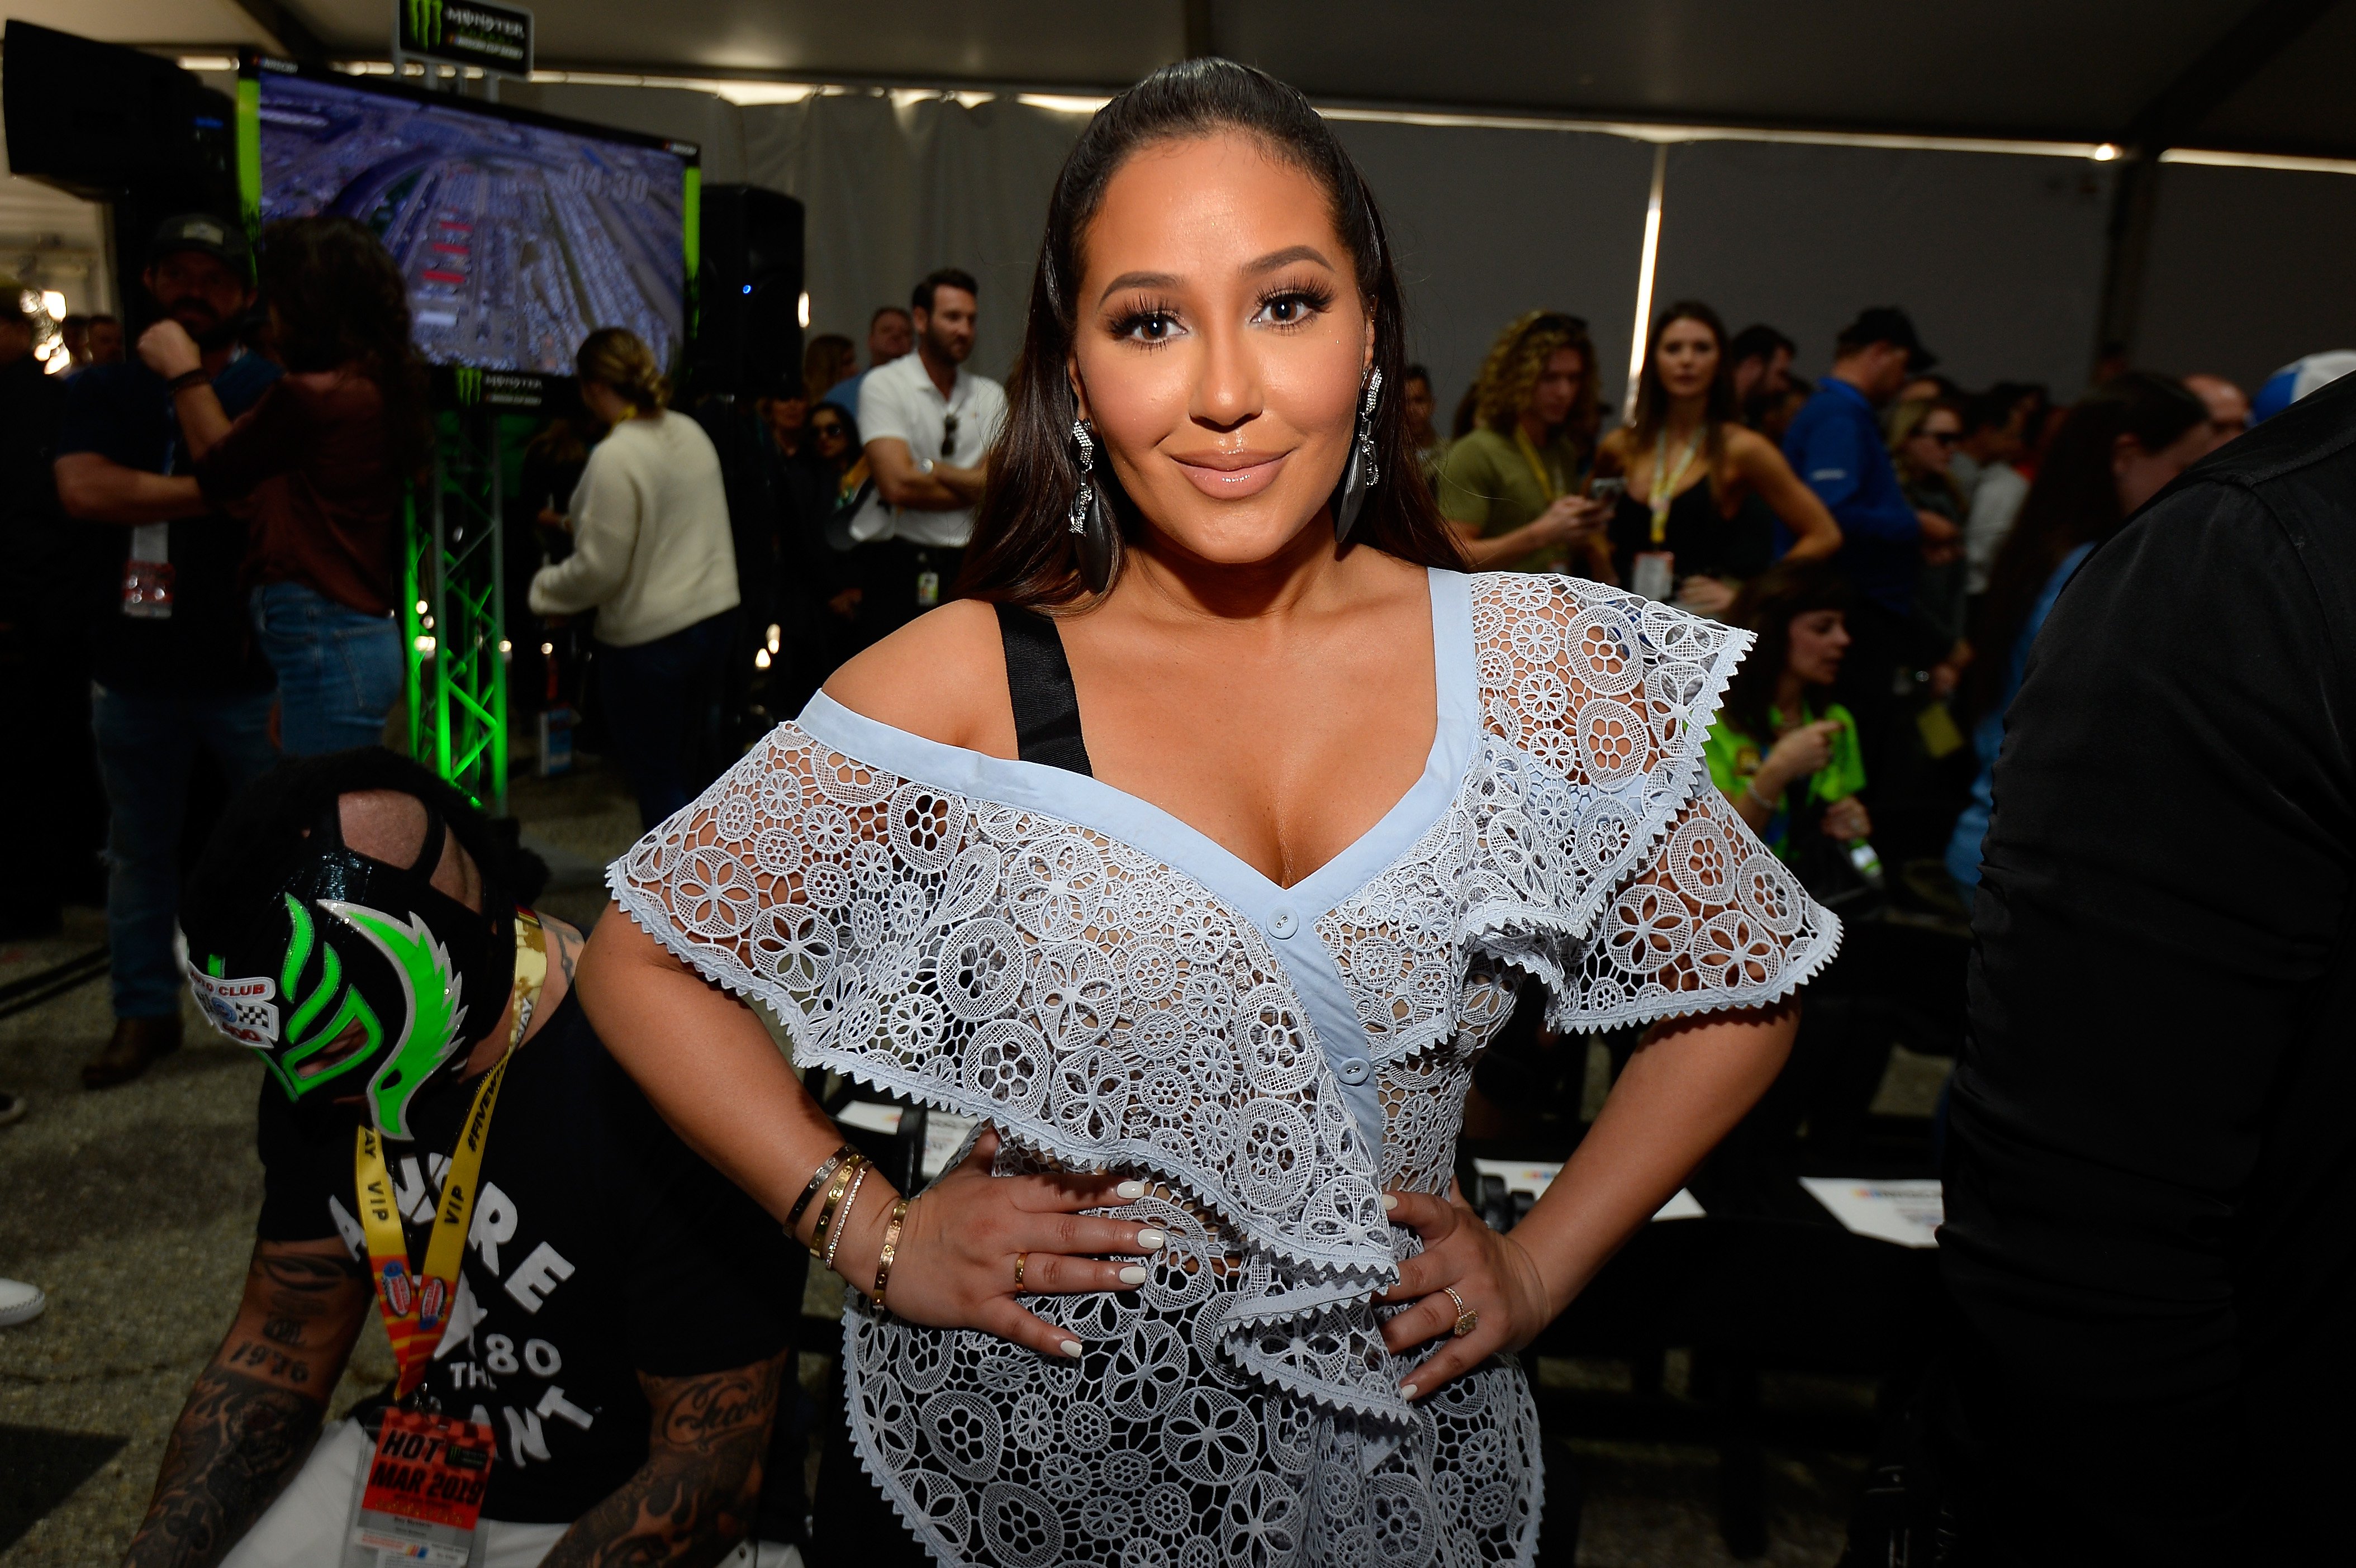 Adrienne Houghton began her vegan diet in the spring, around the time this photo was taken at a NASCAR event in March 2019. | Photo: Getty Image